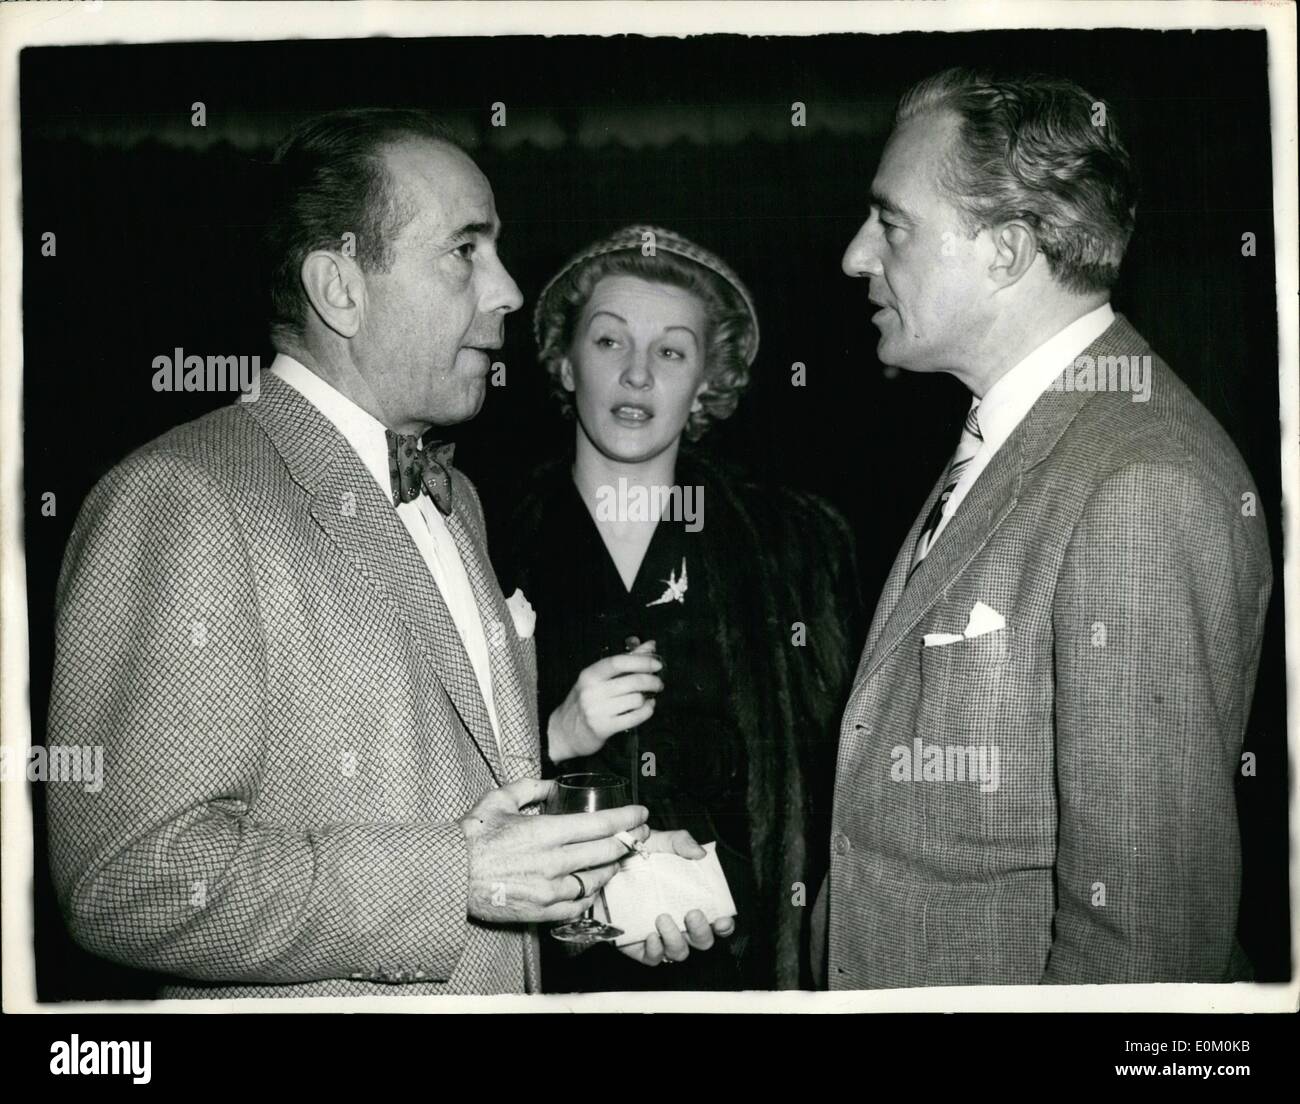 Jan. 01, 1953 - Italian Film Actor and Director in London: Vittorio De Sica, the Italian film actor and director - he directed ''Hiracle in Milan'' - arrived in London today. Photo Shows Vittorio De Sica seen chatting to Anne Crawford and Humphrey Bogart, at a press reception today. Stock Photo